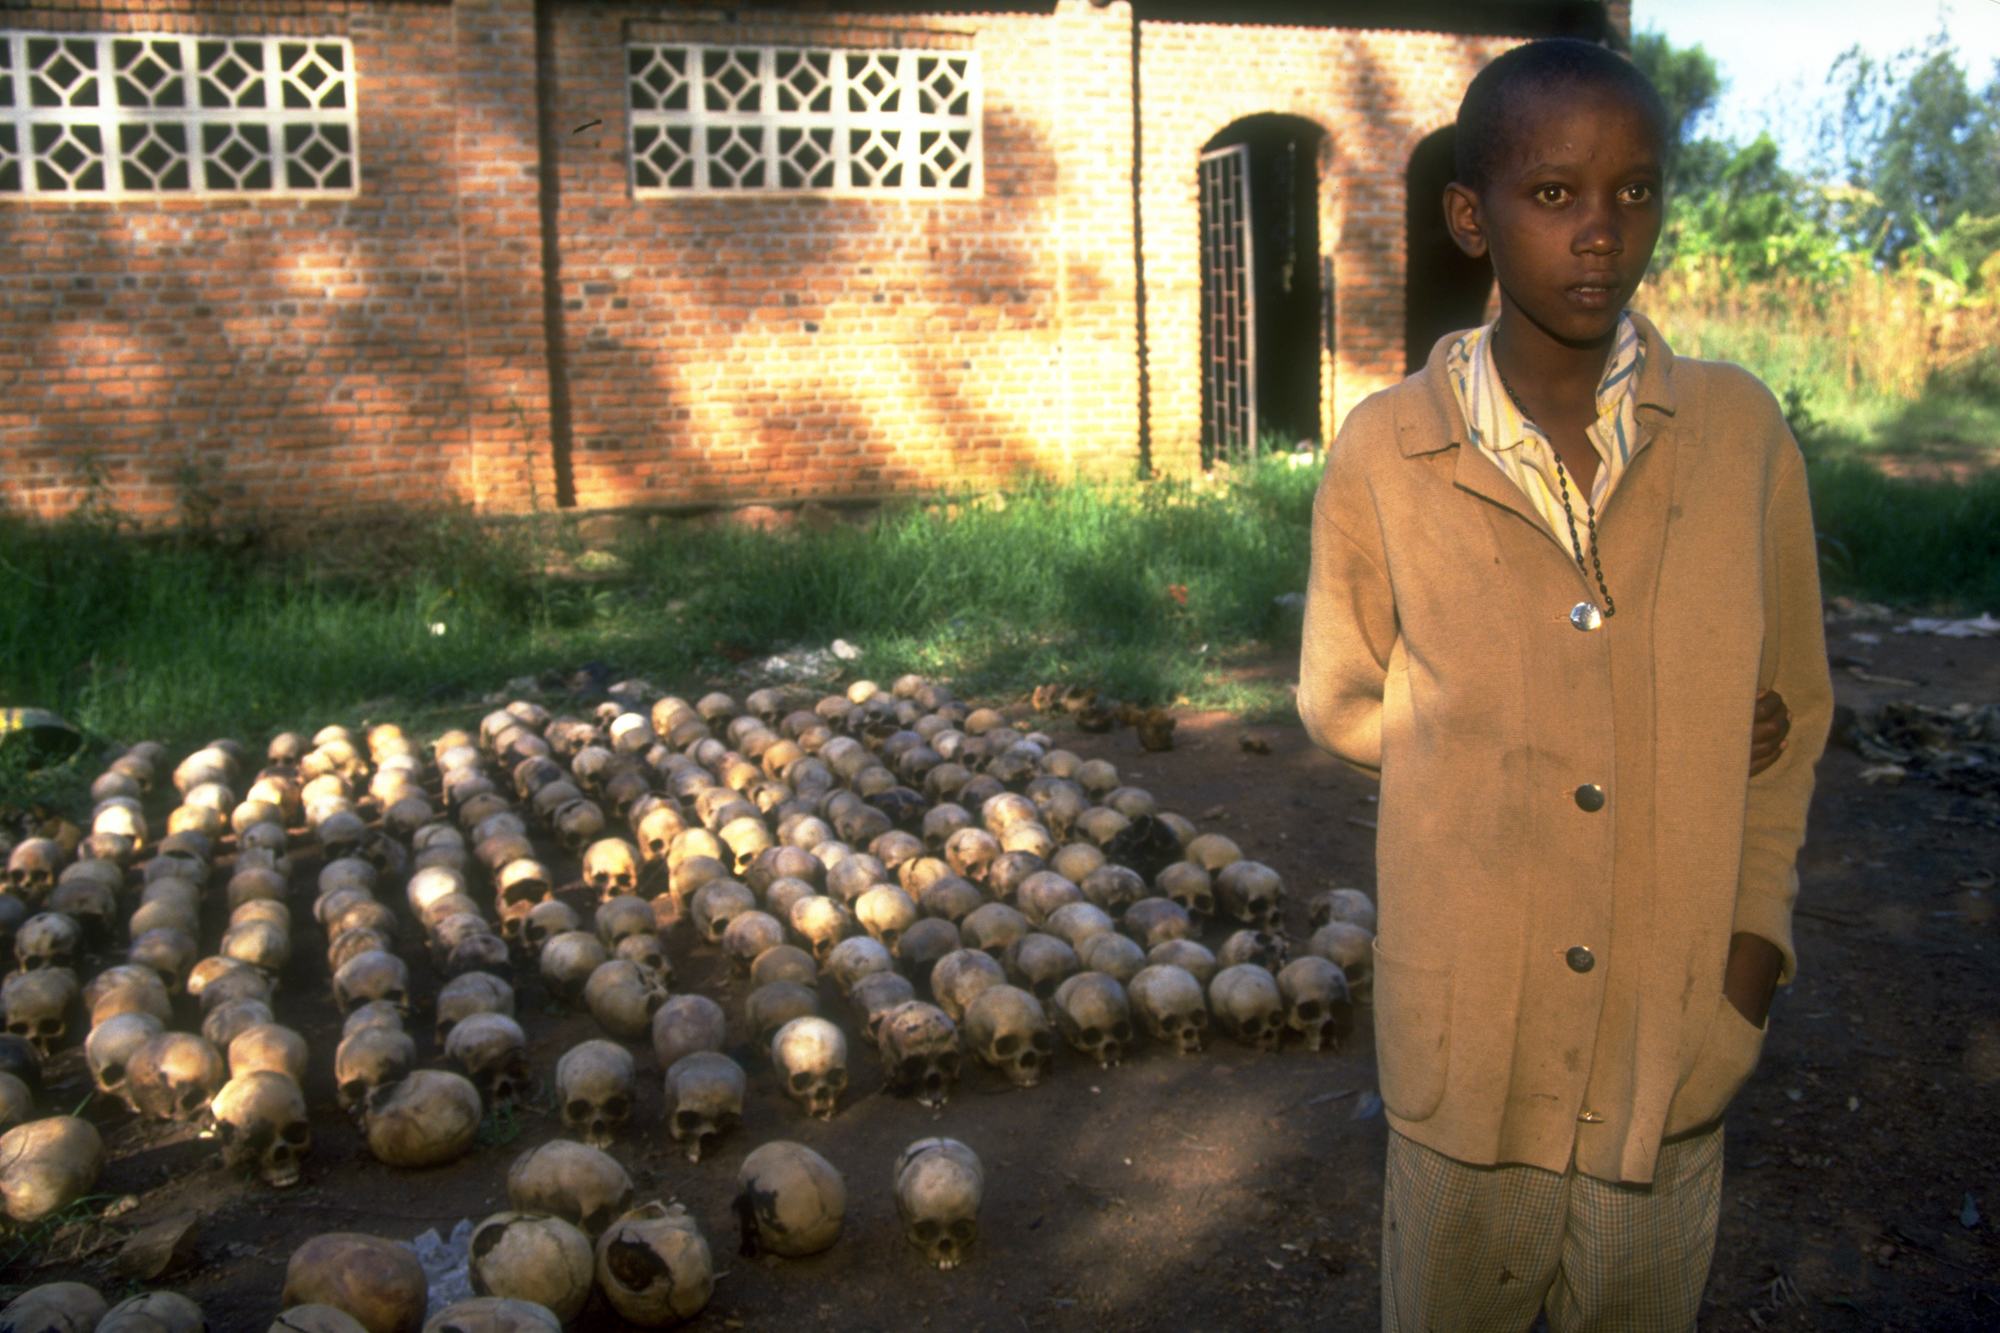 A 14-year-old Rwandan boy from the town of Nyamata, photographed in June 1994, survived the genocide by hiding under corpses for two days.